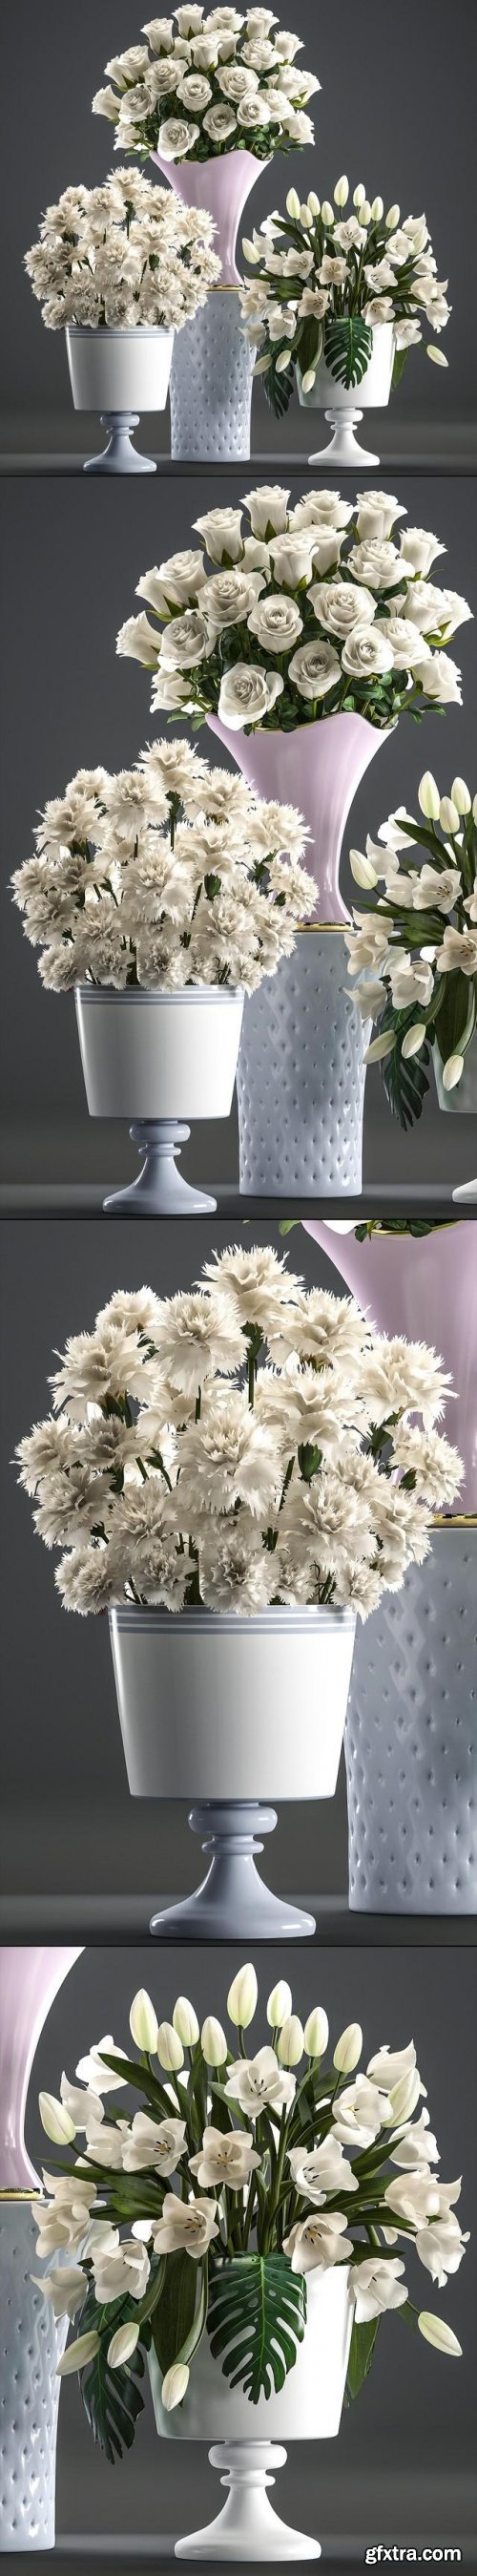 Collection of flowers 58. White bouquets.